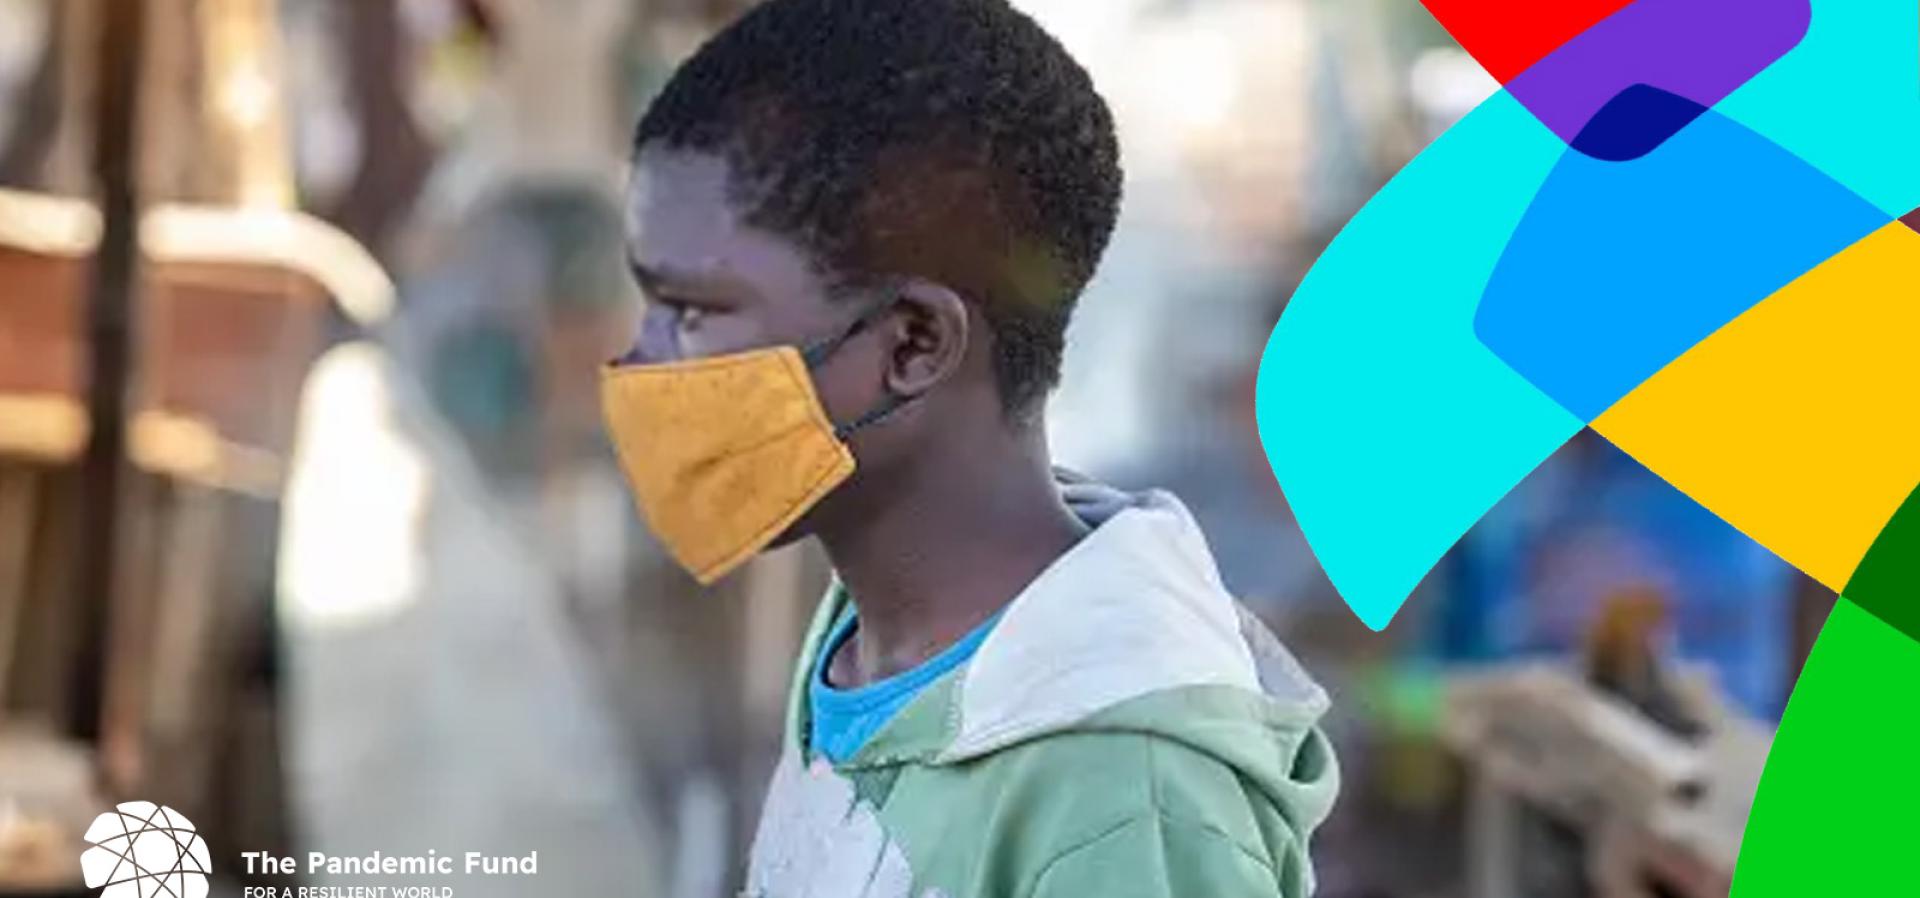 Boy stares to the left, pandemic fund logo overlay